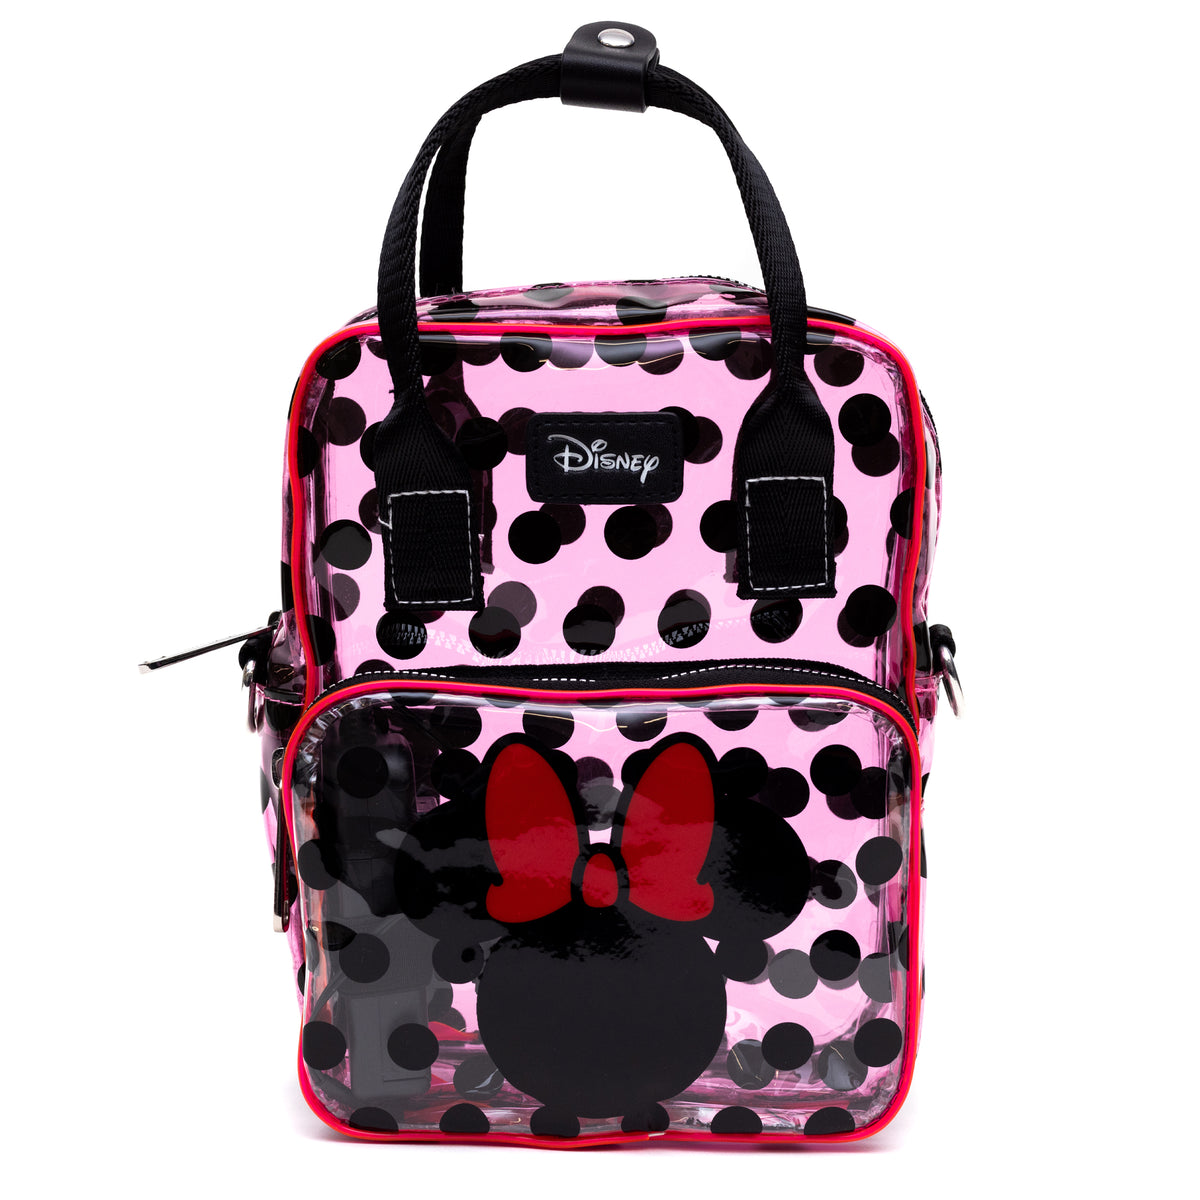 Minnie Mouse Large Carry All Embossed Tin Tote Lunch Box Set